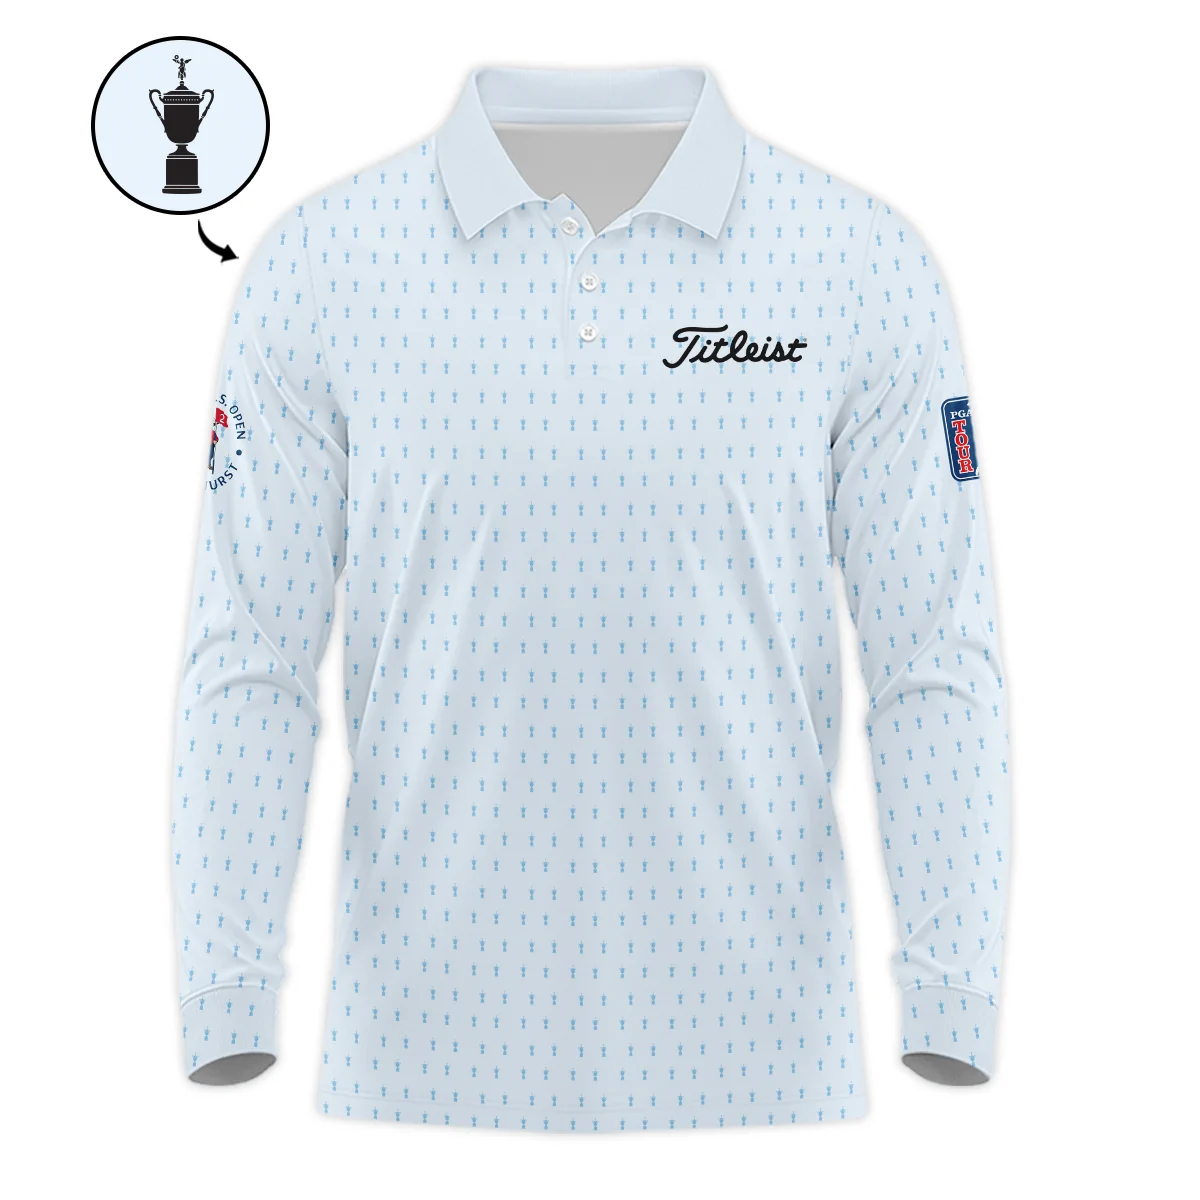 124th U.S. Open Pinehurst Titleist Stand Colar Jacket Sports Pattern Cup Color Light Blue All Over Print Stand Colar Jacket